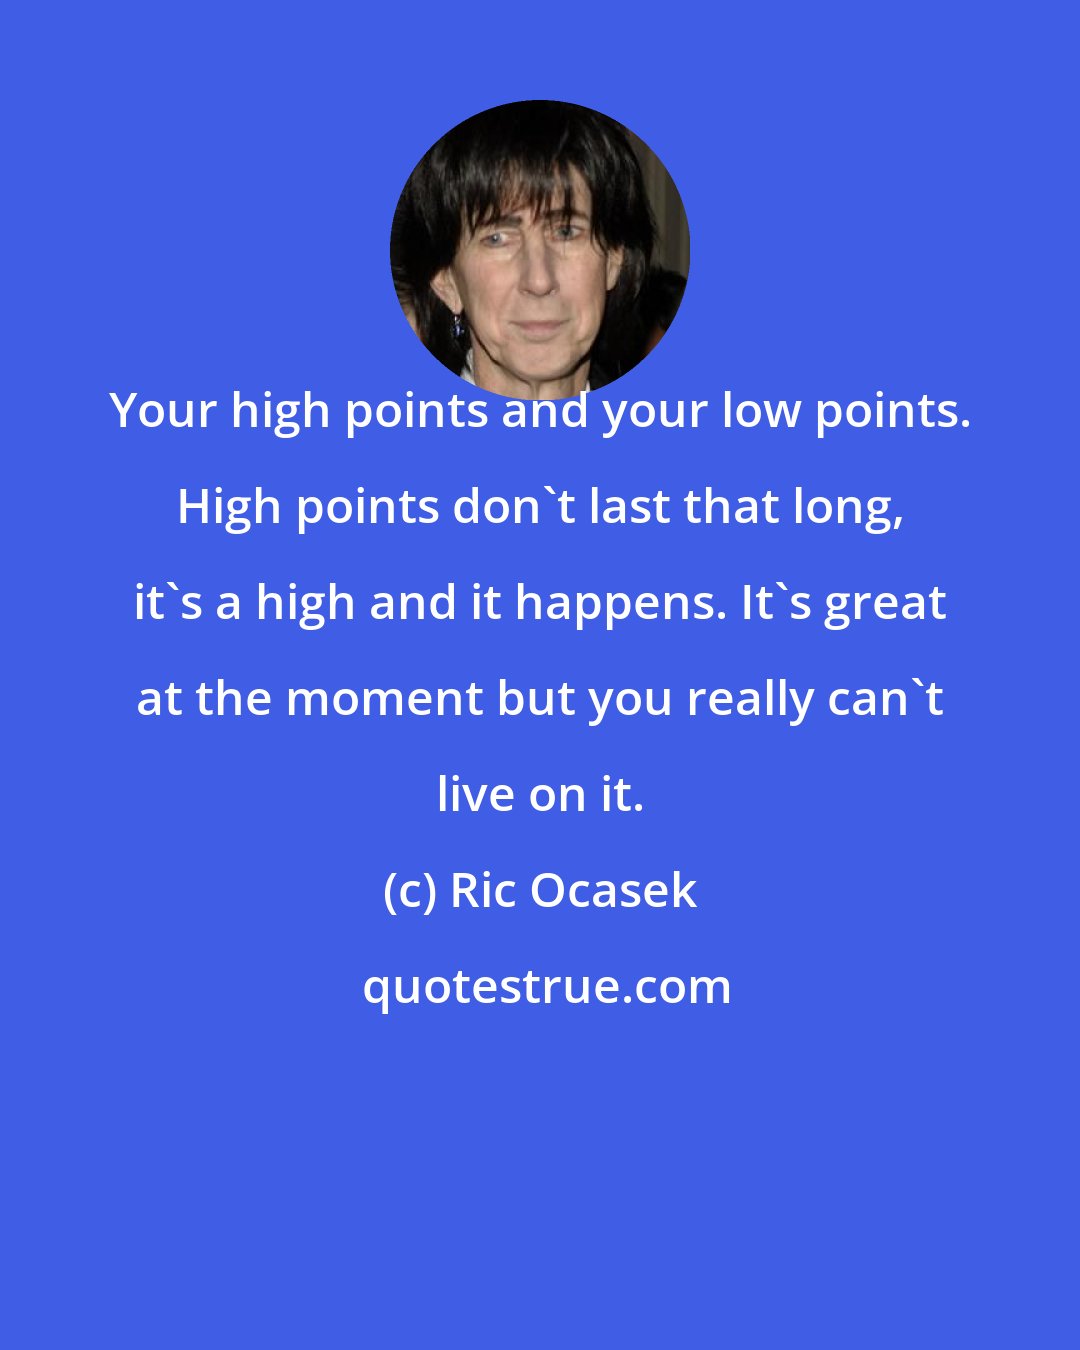 Ric Ocasek: Your high points and your low points. High points don't last that long, it's a high and it happens. It's great at the moment but you really can't live on it.